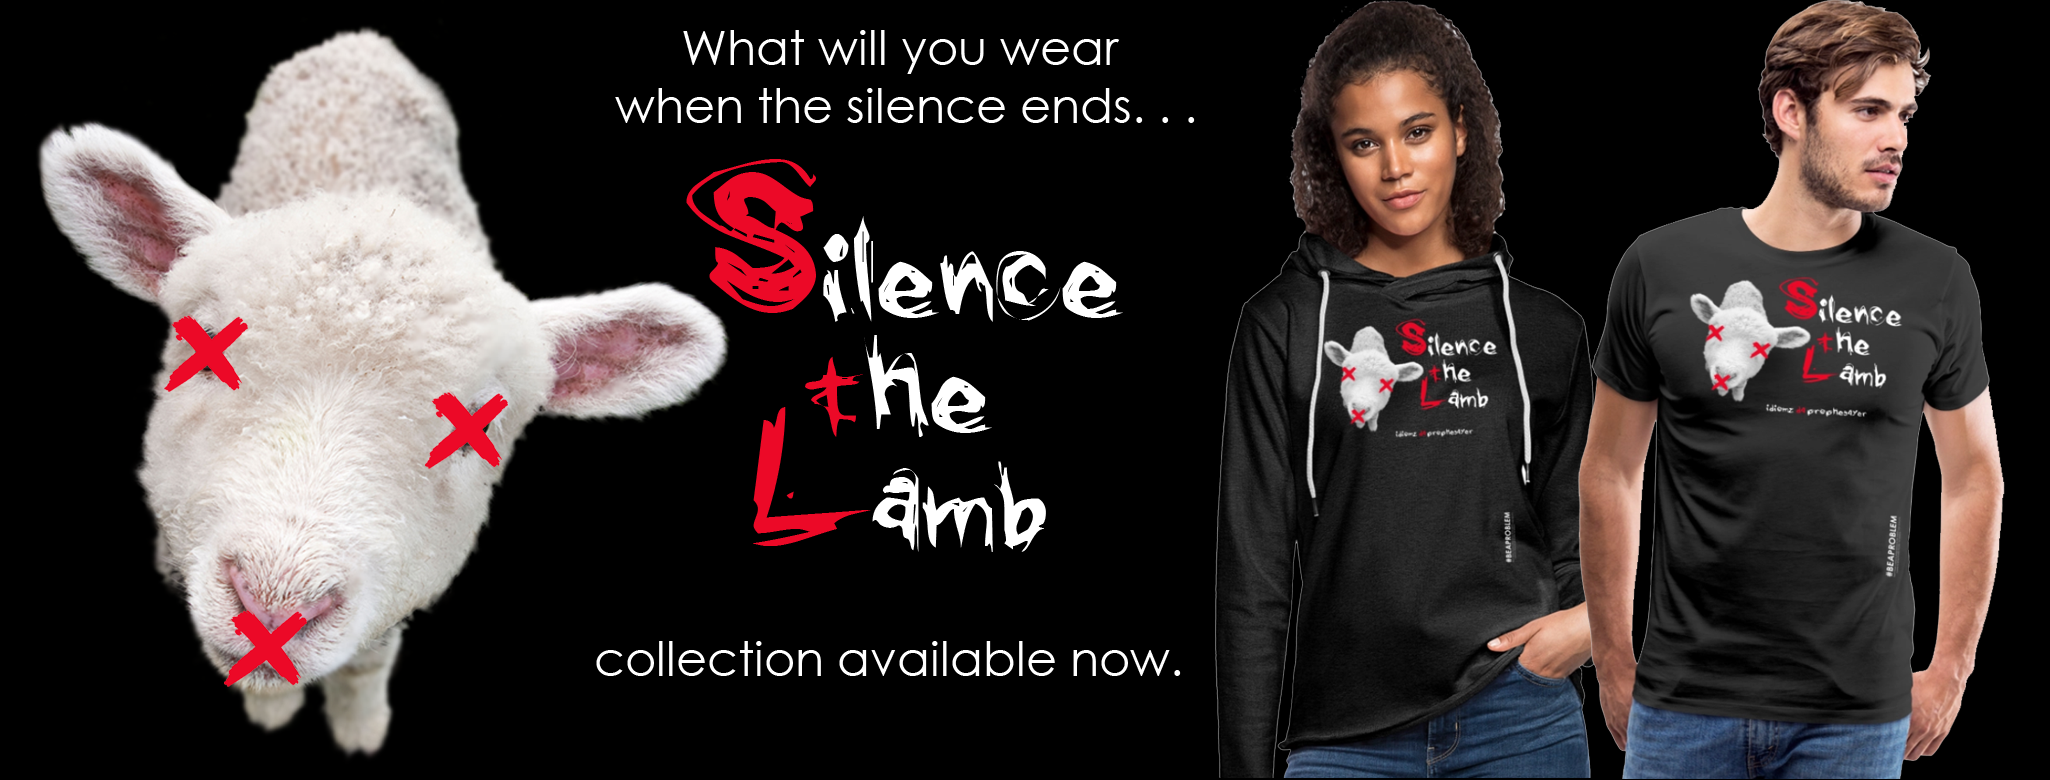 The Silence The Lamb limited edition collection available now.